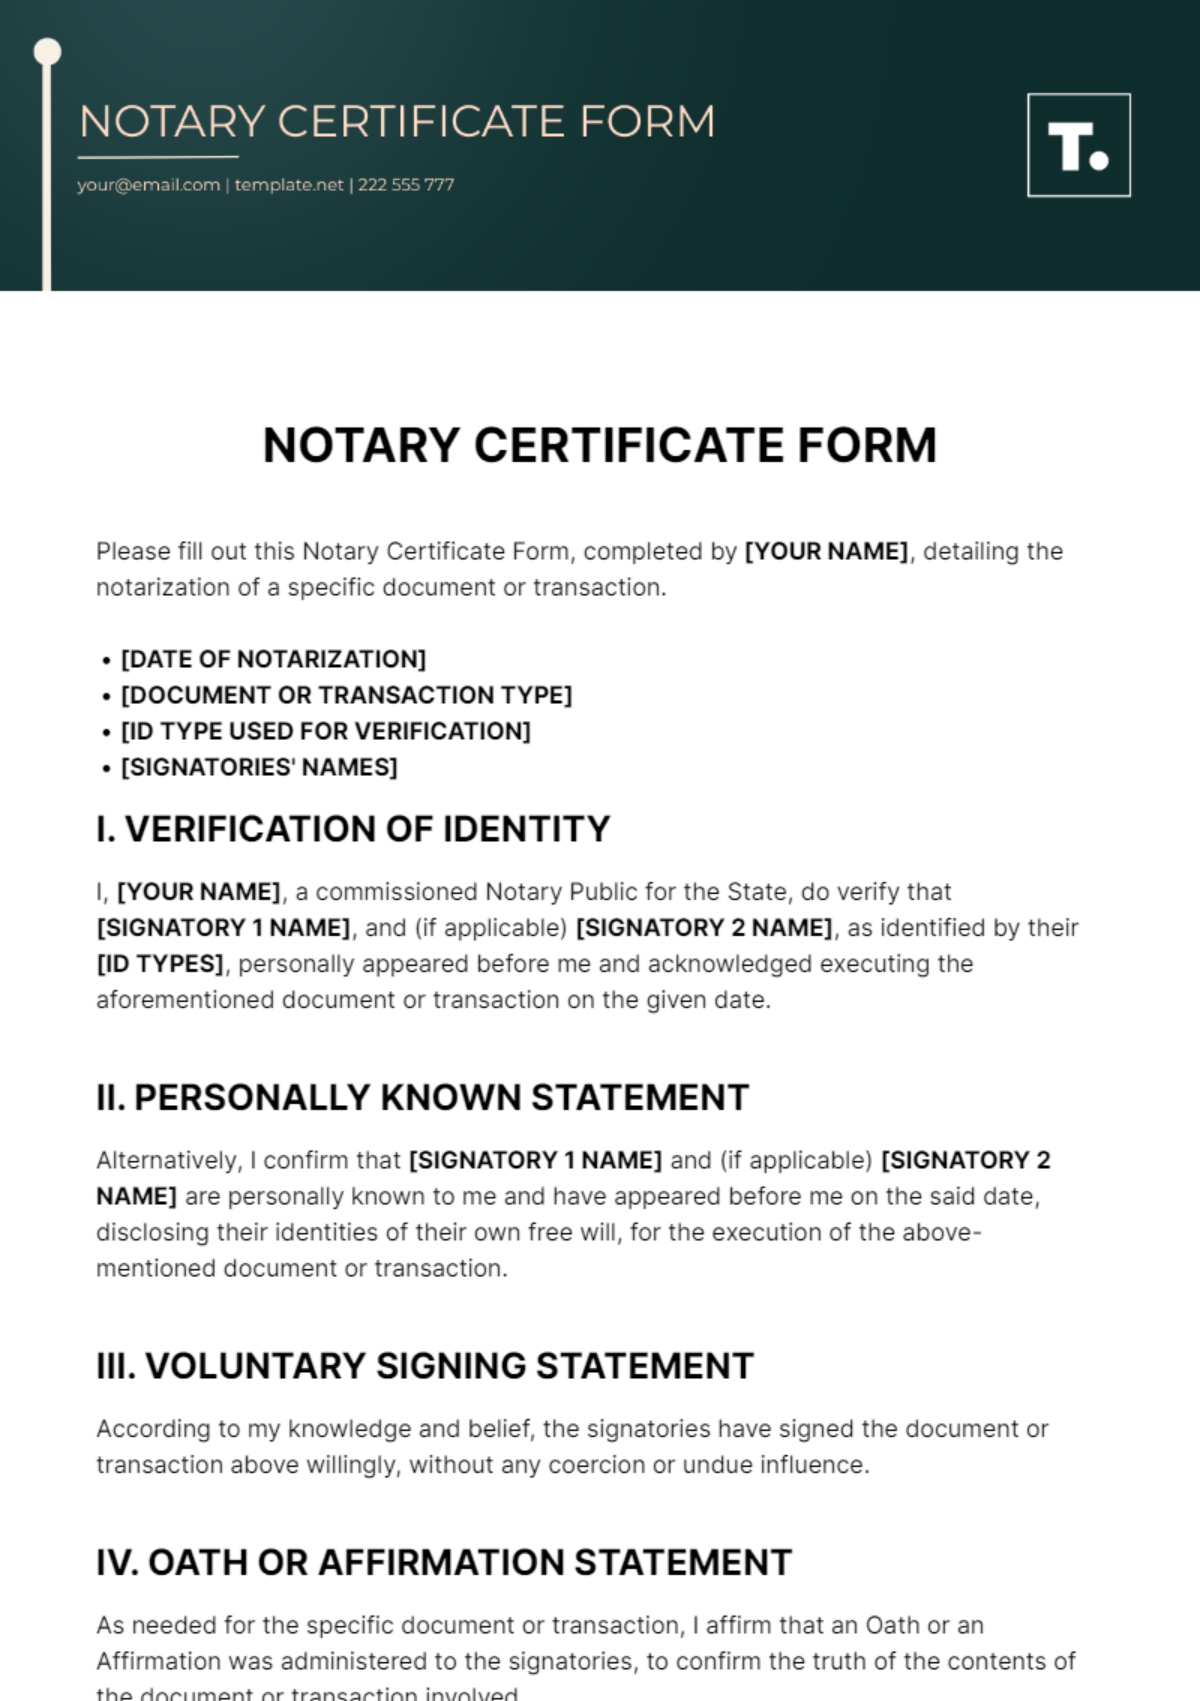 Notary Certificate Form Template